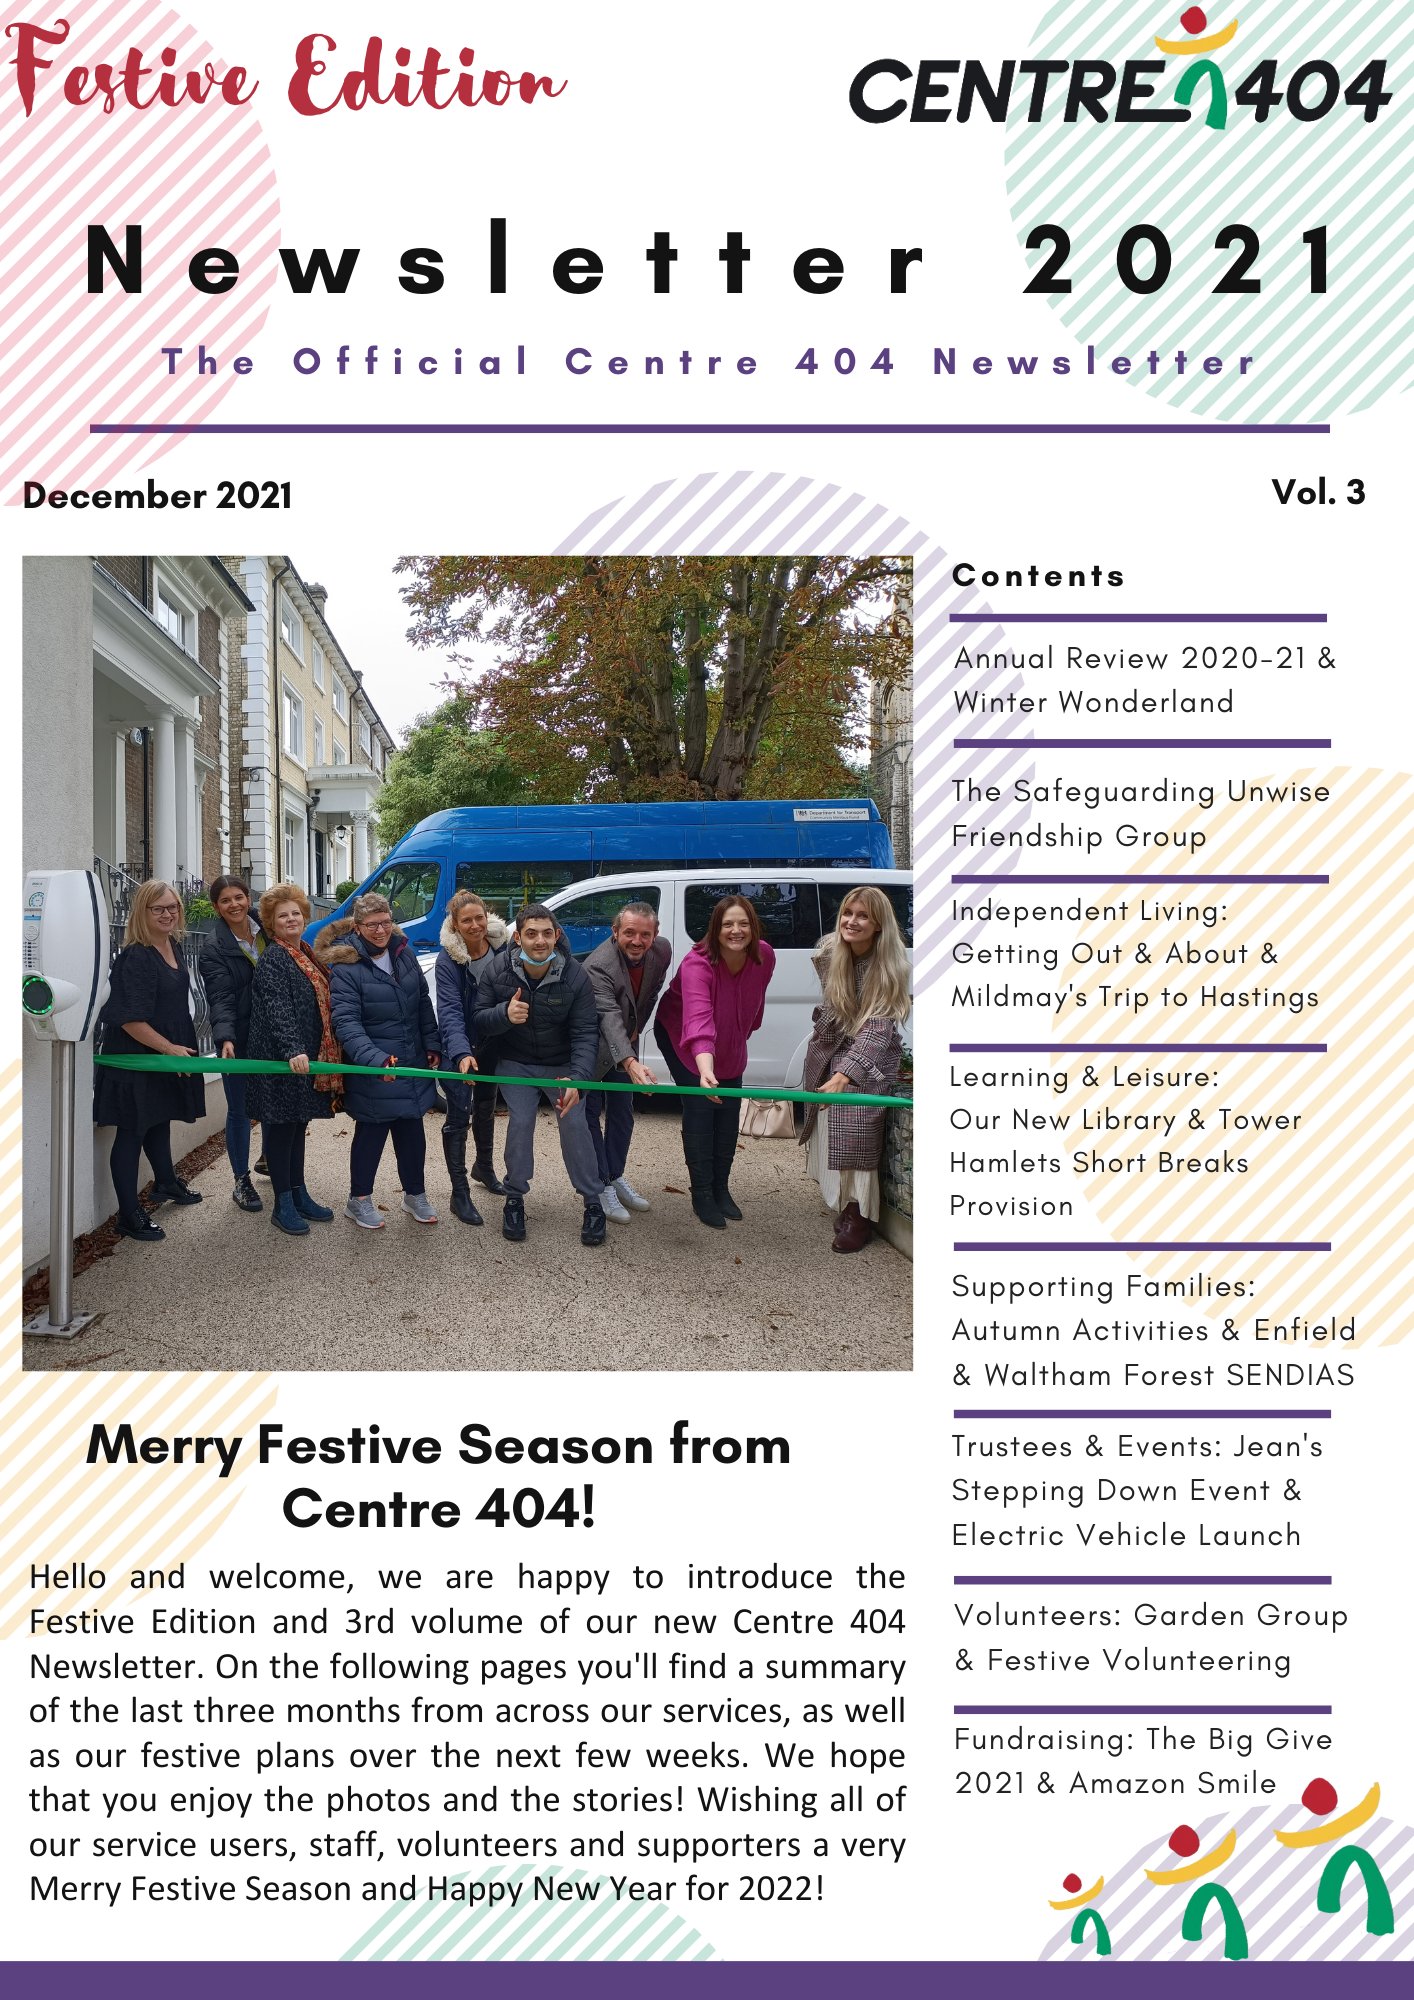 Club Life Newsletter  Winter 2022 by Member Services - Issuu